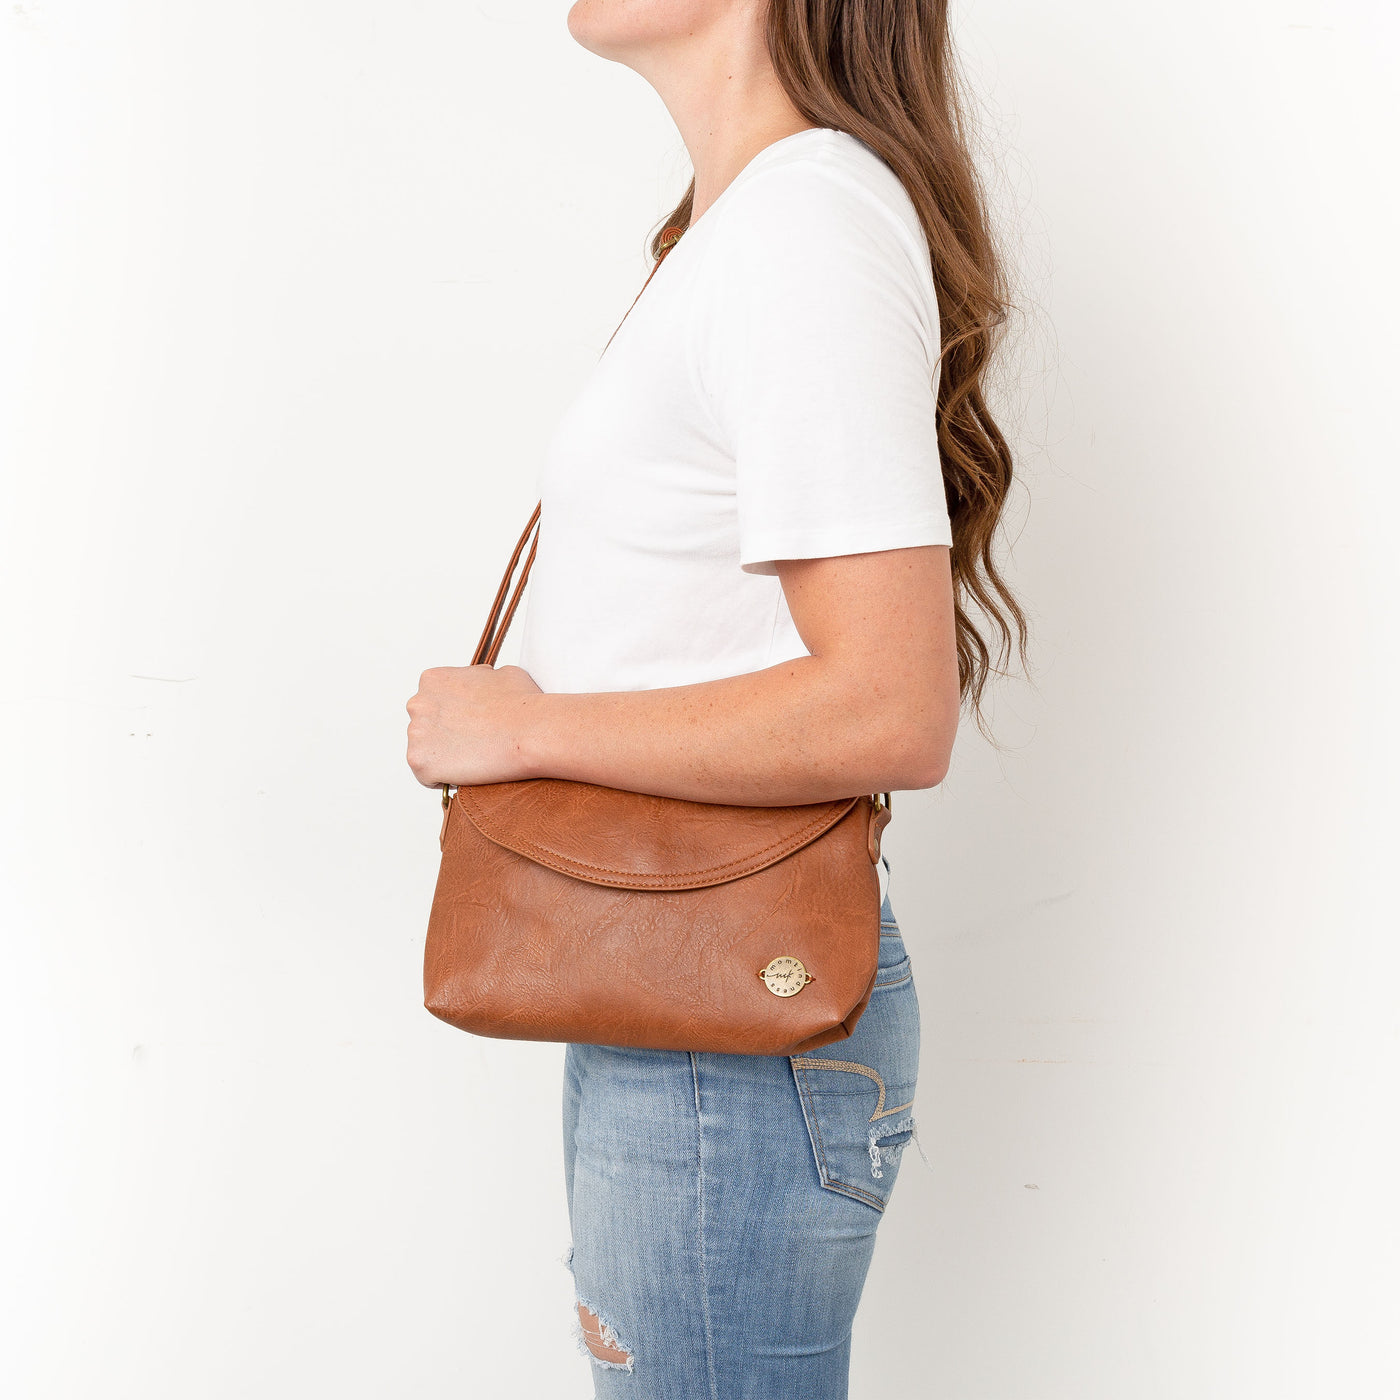 A woman standing side-profile against a white background in jeans and white t-shirt wearing a caramel brown vegan leather crossbody clutch bag.